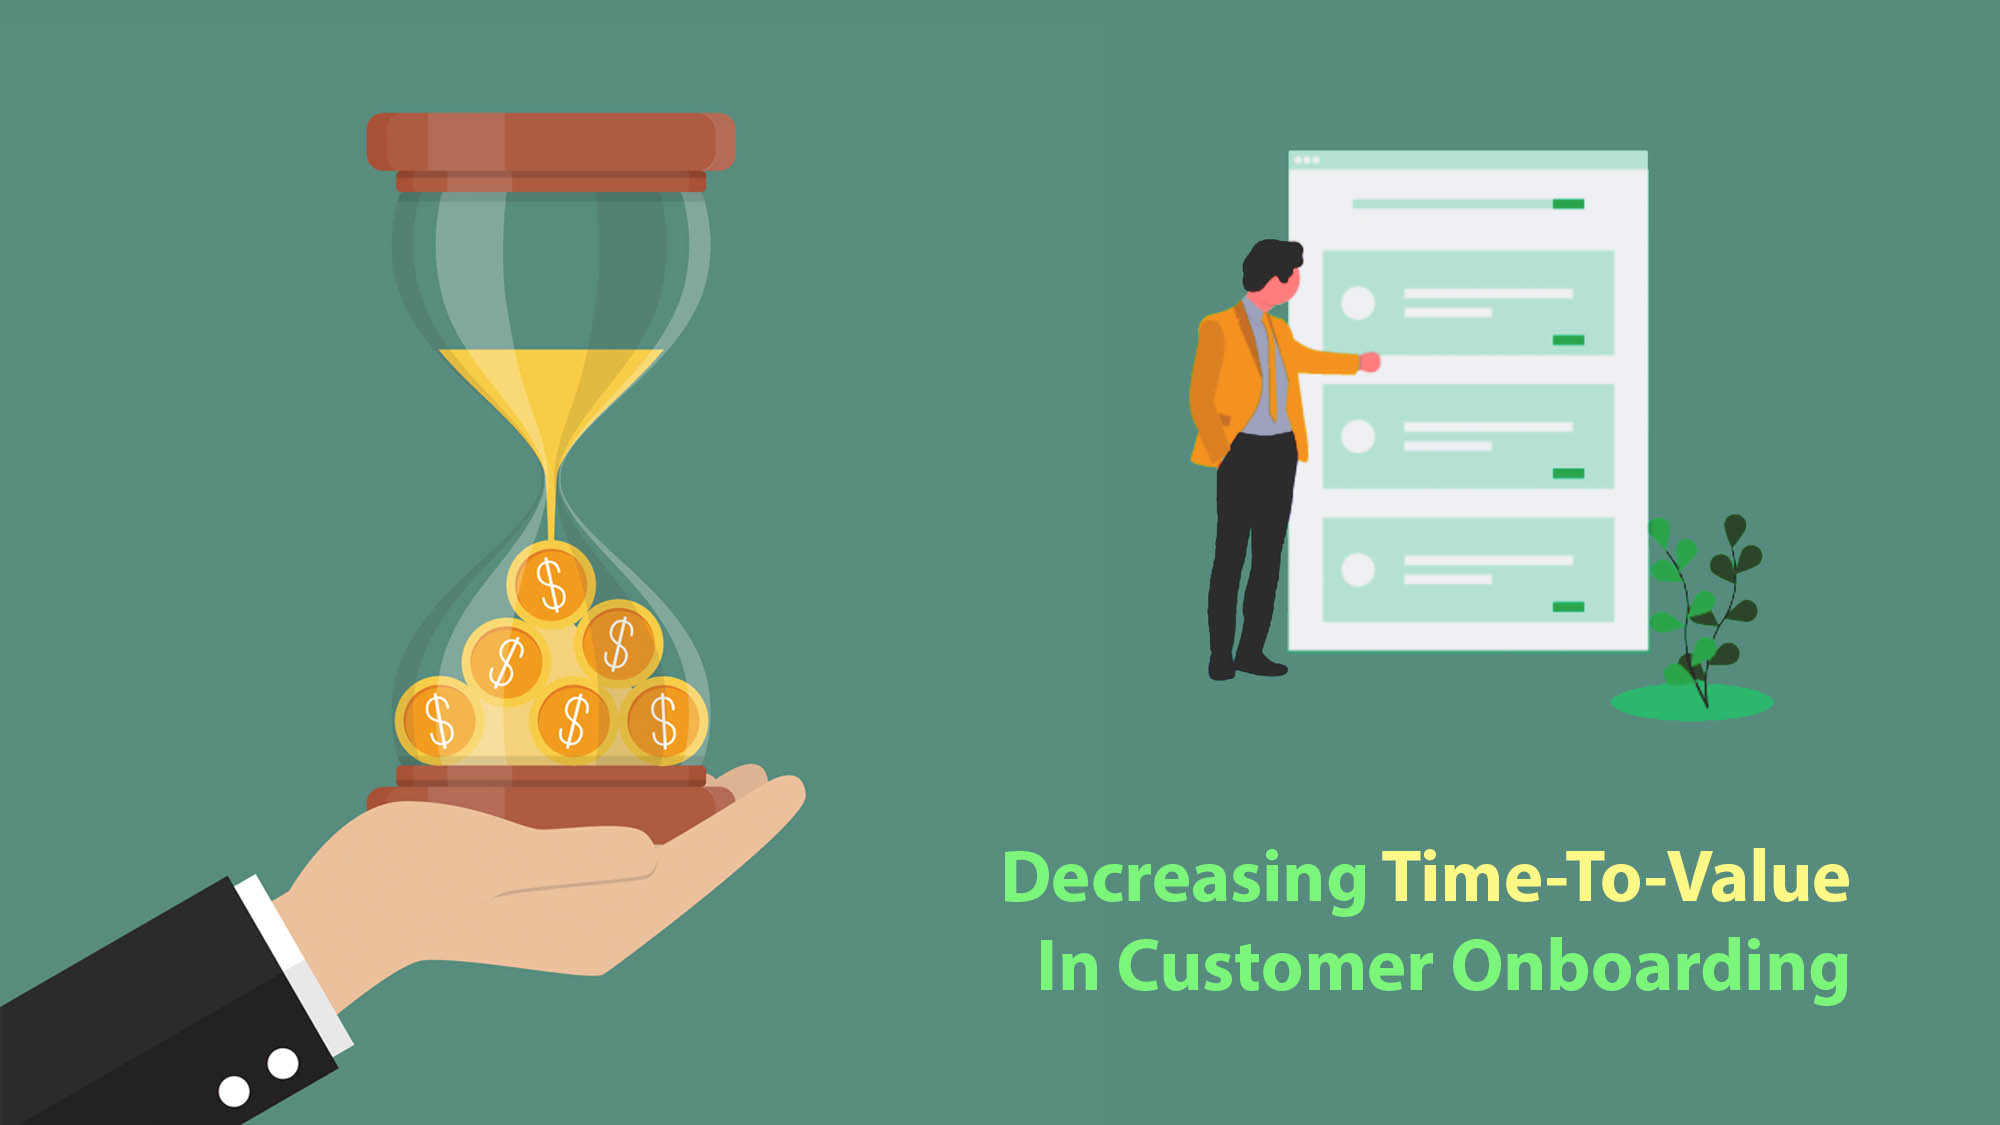 Decreasing-Time-To-Value-in-Customer-Onboarding is crucial